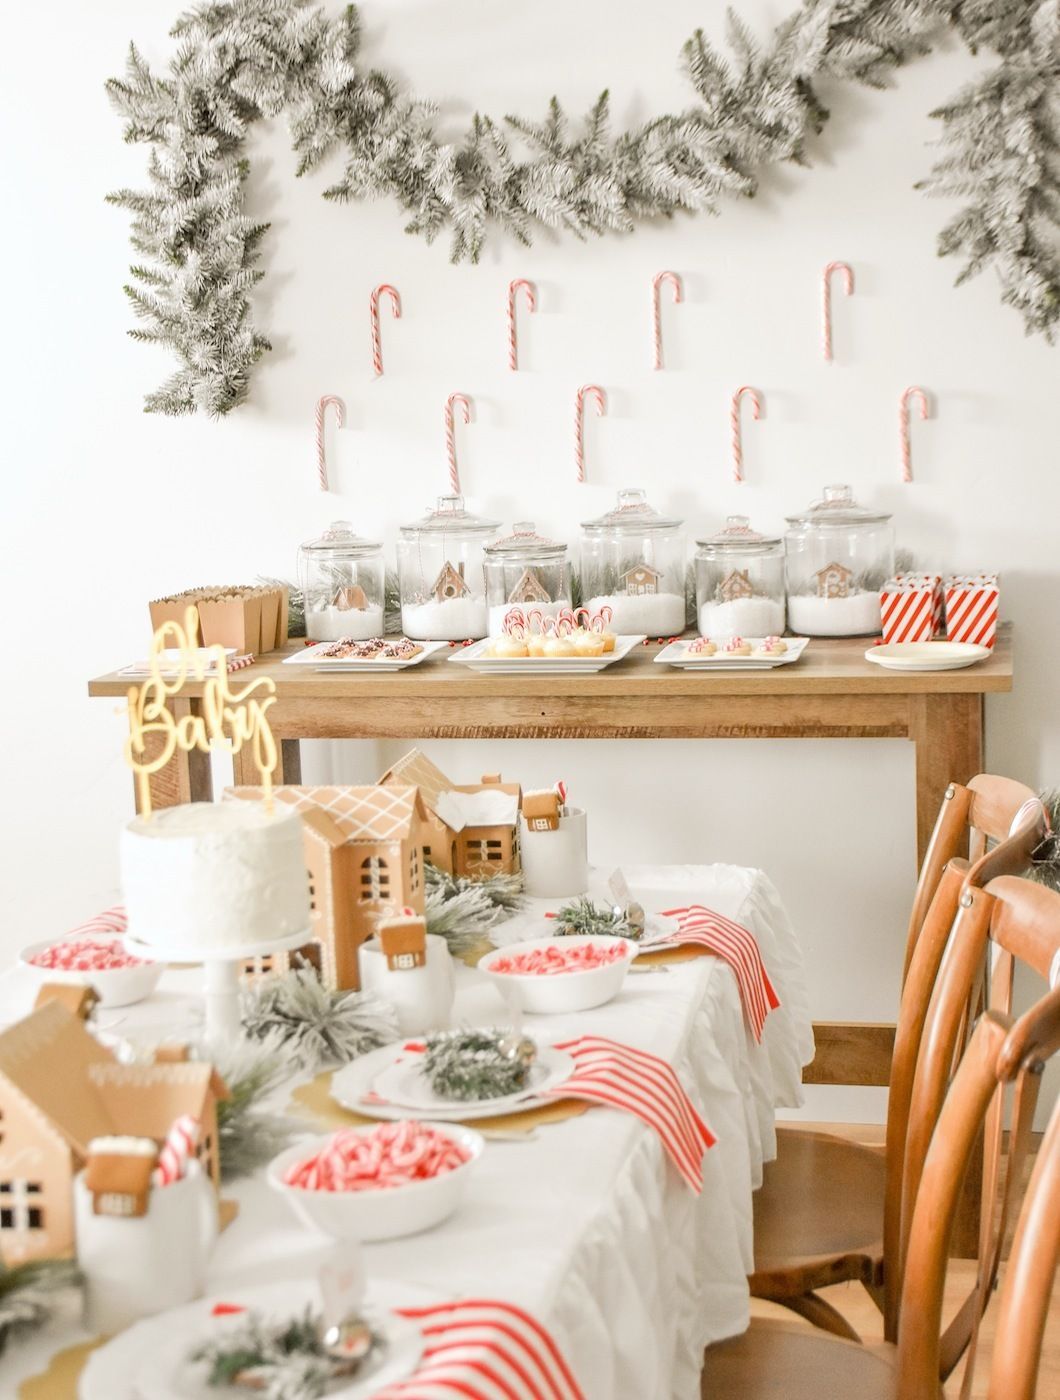 Fun365 | Craft, Party, Wedding, Classroom Ideas & Inspiration -   18 holiday Easter baby shower ideas